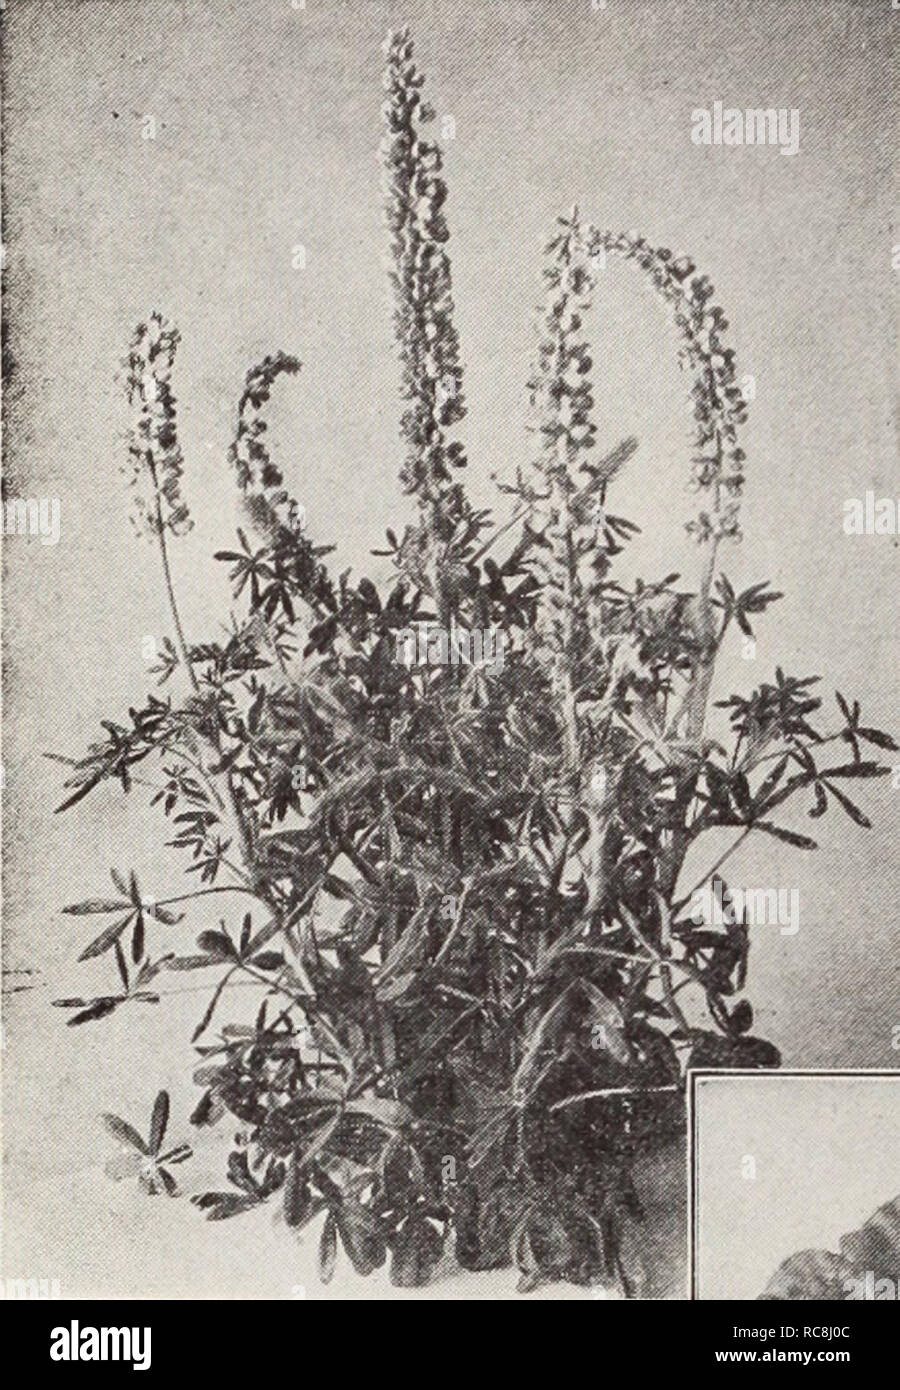 . Dreer's garden book / Henry A. Dreer.. Nursery Catalogue. ^SPECIALTIES IN FLOWER SEEM 'PHILADEMP;. Lupinus Hartwegii Giants Linaria Maroccana Excelsior Hybrids 2992 A dainty easily grown annual bear- ing small spikes, like a miniature Snapdragon of brilliant colors in- cluding yellow, crimson, pink, pur- ple, etc.; plant grows about 12 in- ches high and is a charming subject for the rockery or border. Pkt., 15 cts.; i oz., 40 cts. Lobelia Cardinalis Queen Victoria 3032 A wonderfully effective perennial variety, with dark bronzy foliage and brilliant scarlet flowers, stand- ing out in vivid c Stock Photo